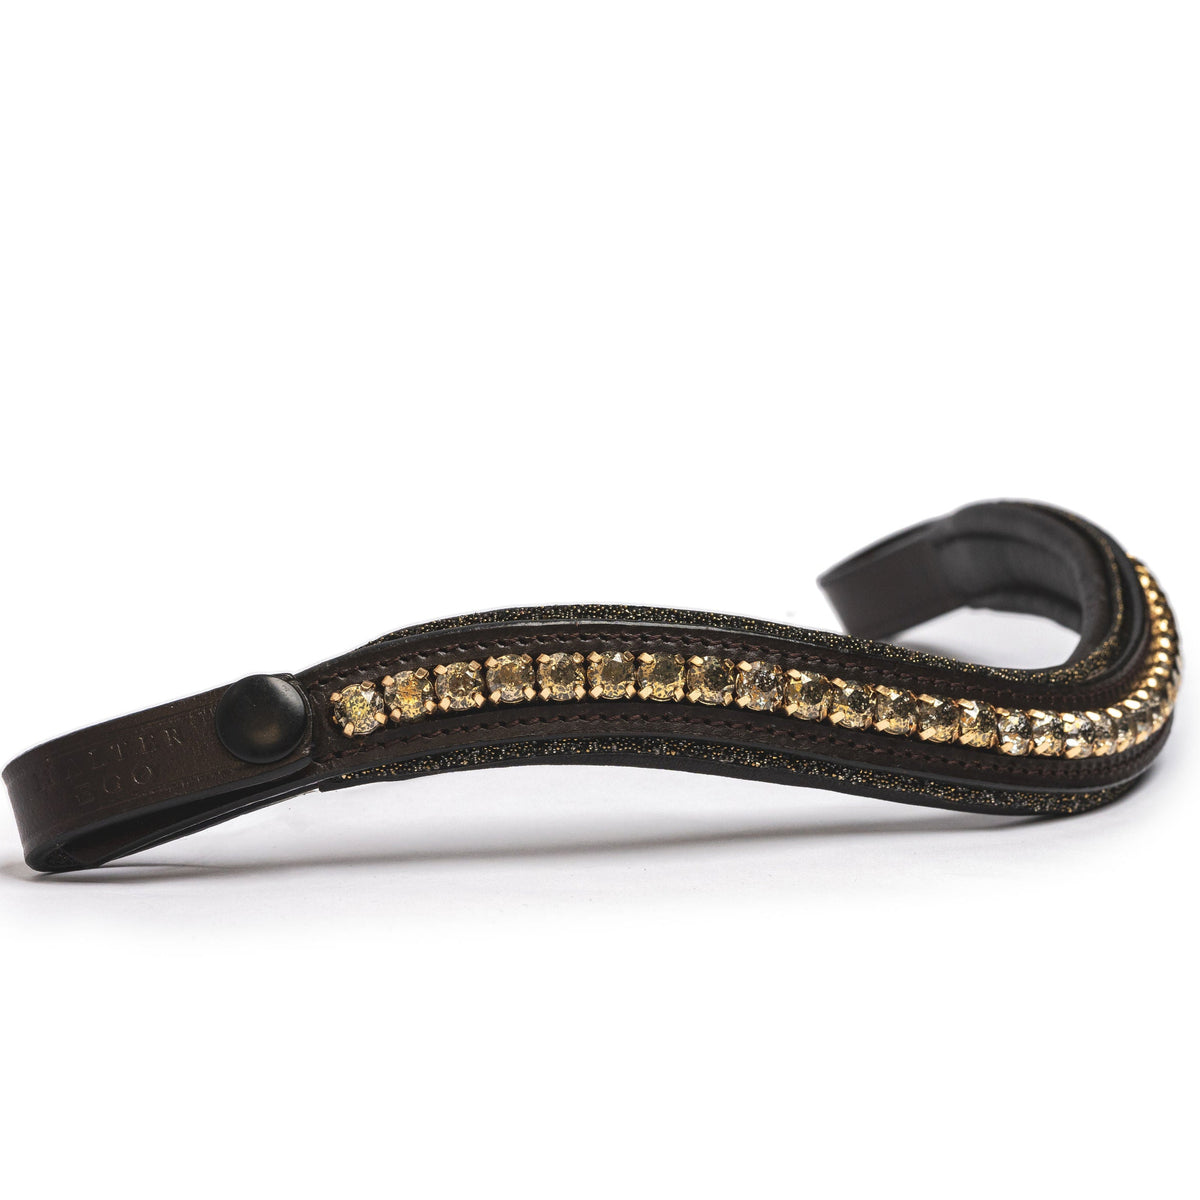 Midas Touch - Limited Edition Brown Leather Browband